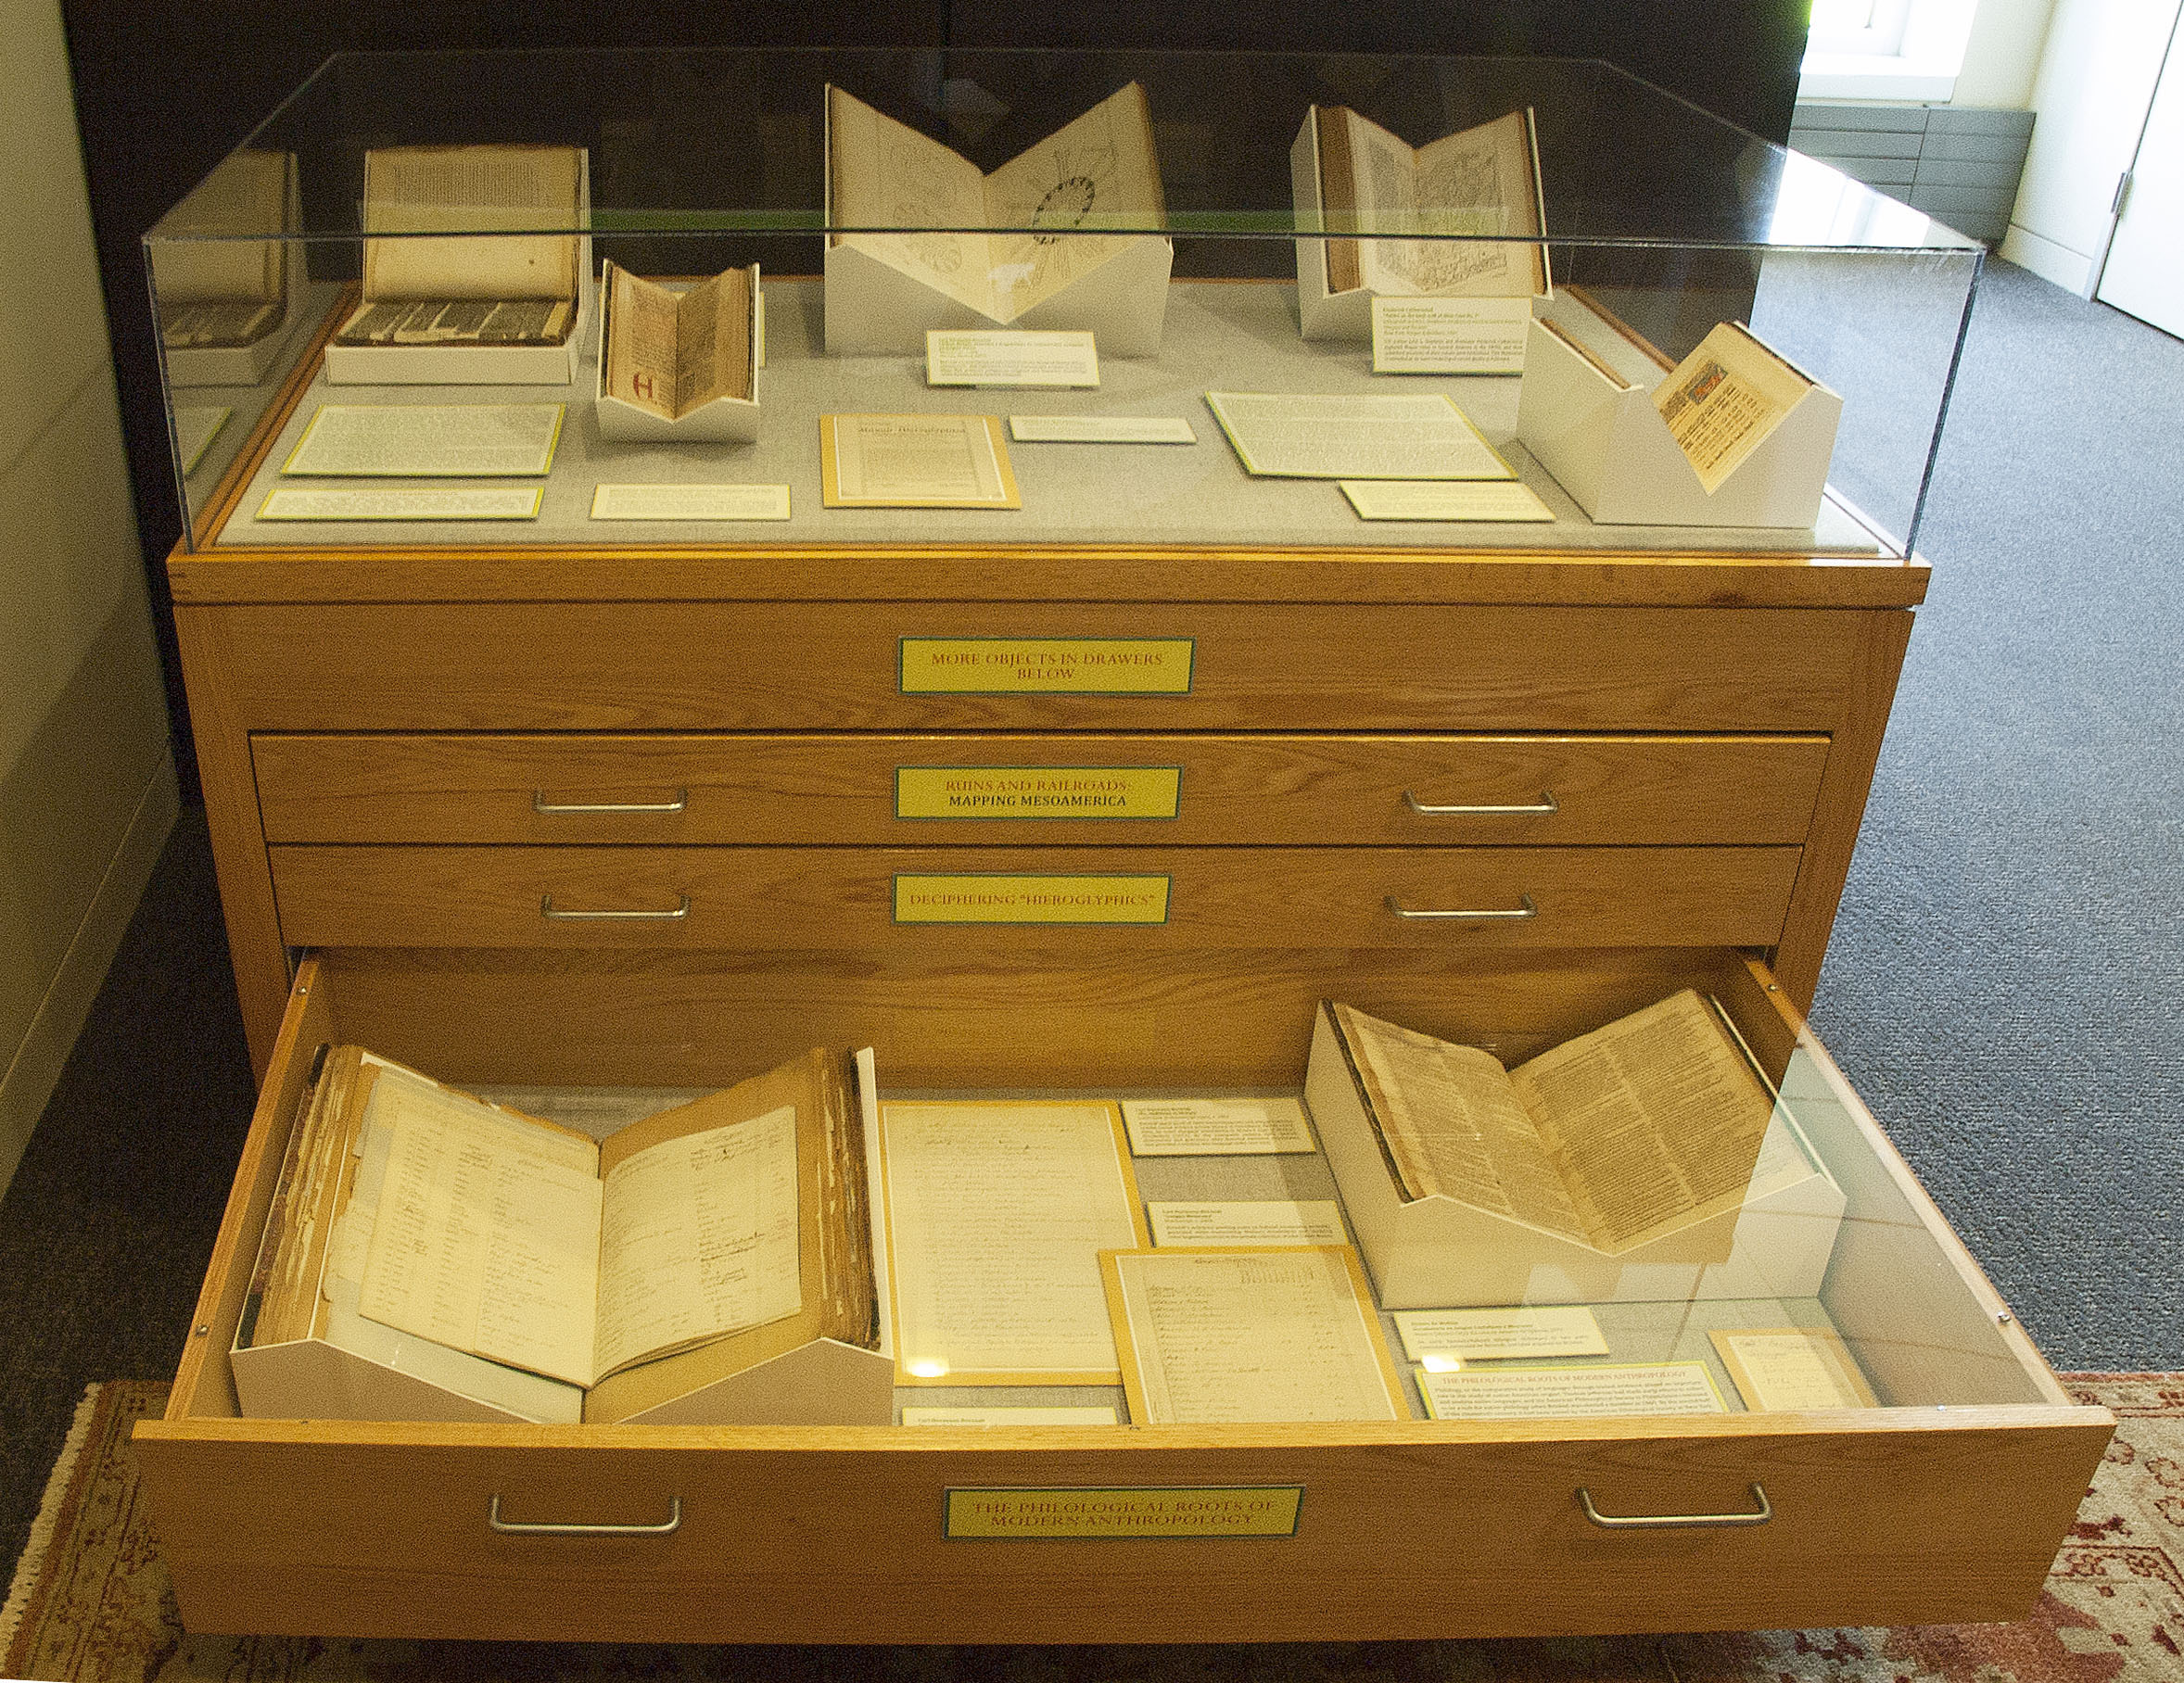 Drawer 3 - The Philological Roots of Modern Anthropology